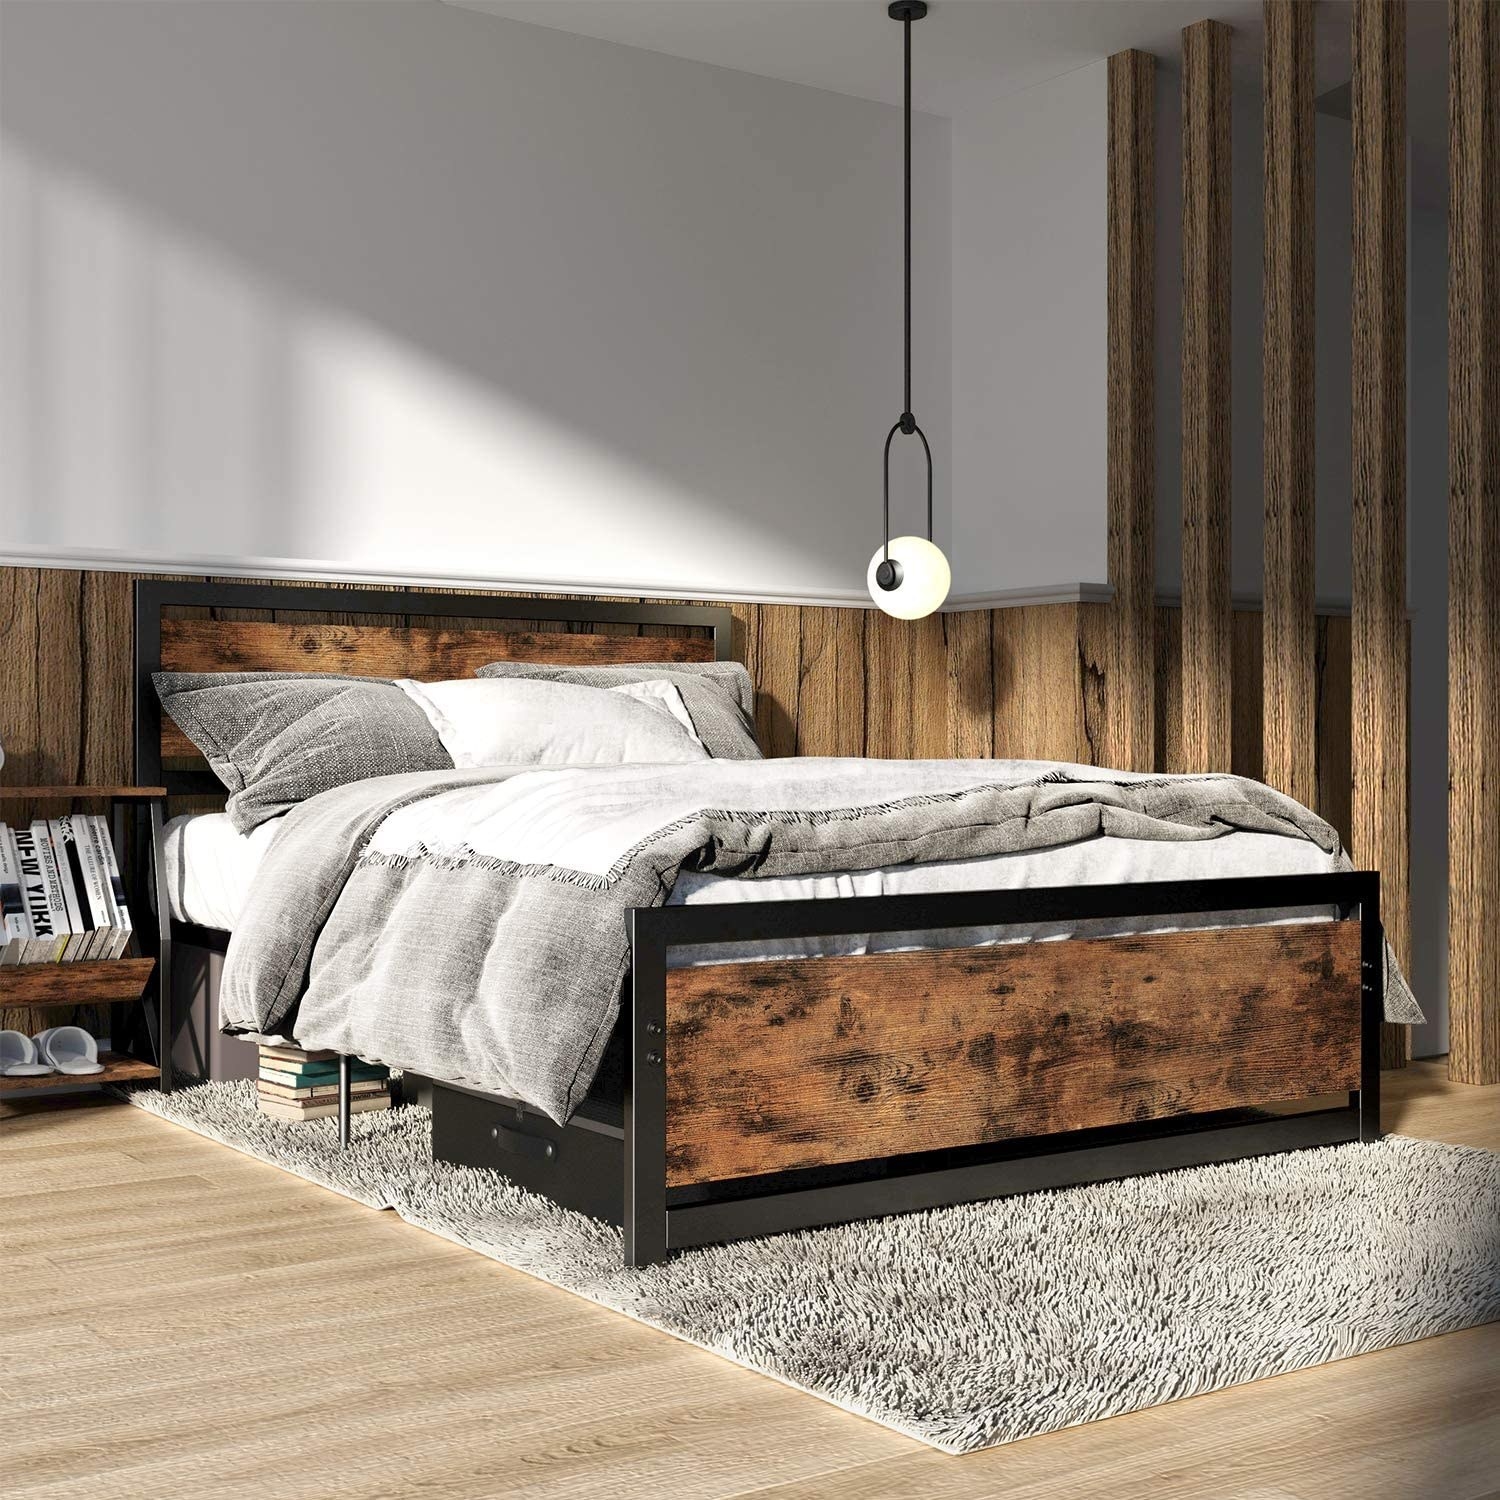 27 Bed Frames That Only Look, Manly Bed Frames